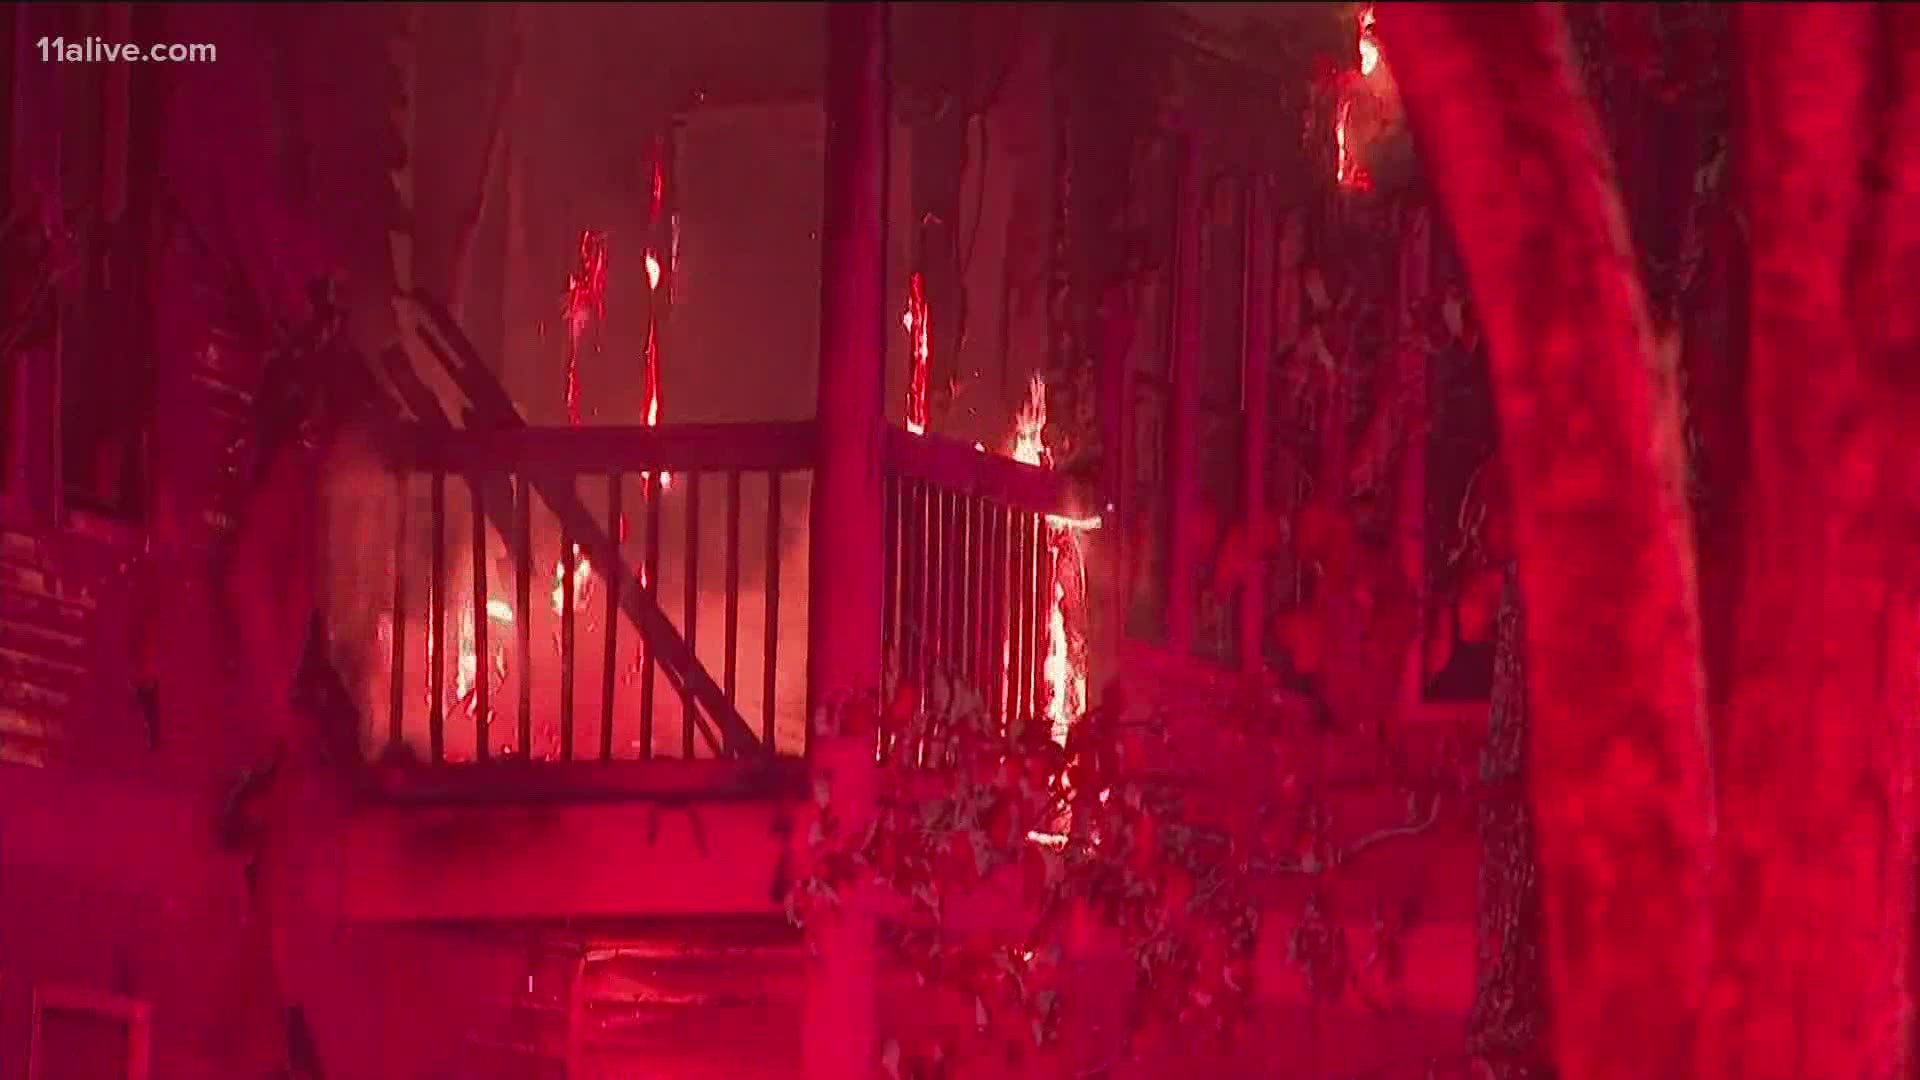 17 residents were displaced due to this massive fire.